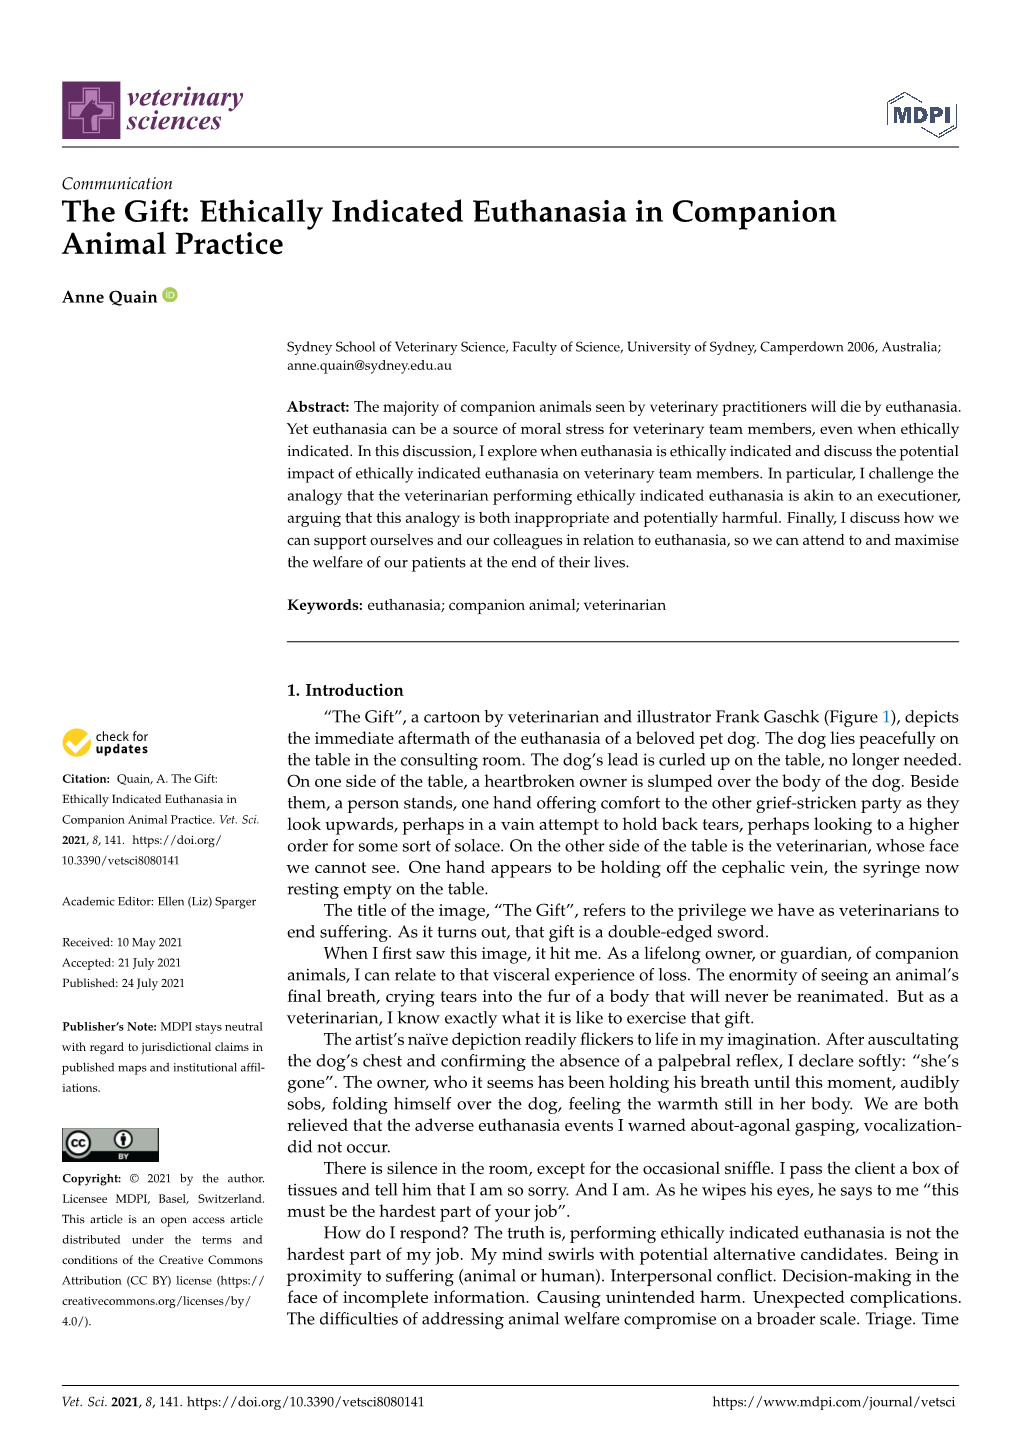 Ethically Indicated Euthanasia in Companion Animal Practice